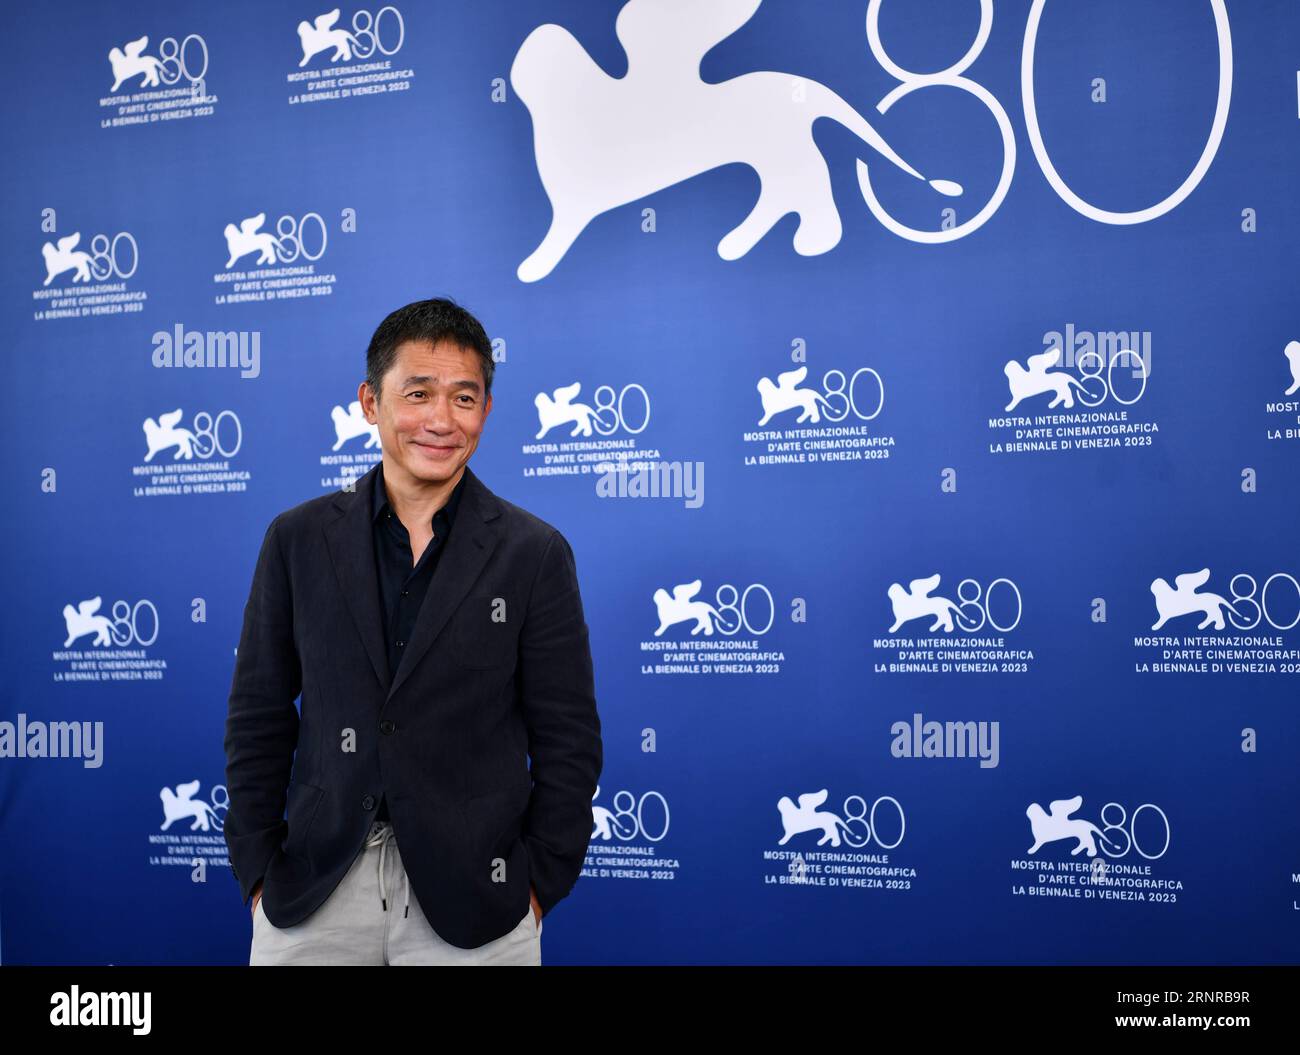 Venice, Italy. 2nd Sep, 2023. Actor Tony Leung Chiu-Wai attends a photocall during the 80th Venice International Film Festival in Venice, Italy, on Sept. 2, 2023. Tony Leung Chiu-Wai of Hong Kong, China was presented with the Golden Lion for Lifetime Achievement during the event on Saturday. Credit: Jin Mamengni/Xinhua/Alamy Live News Stock Photo